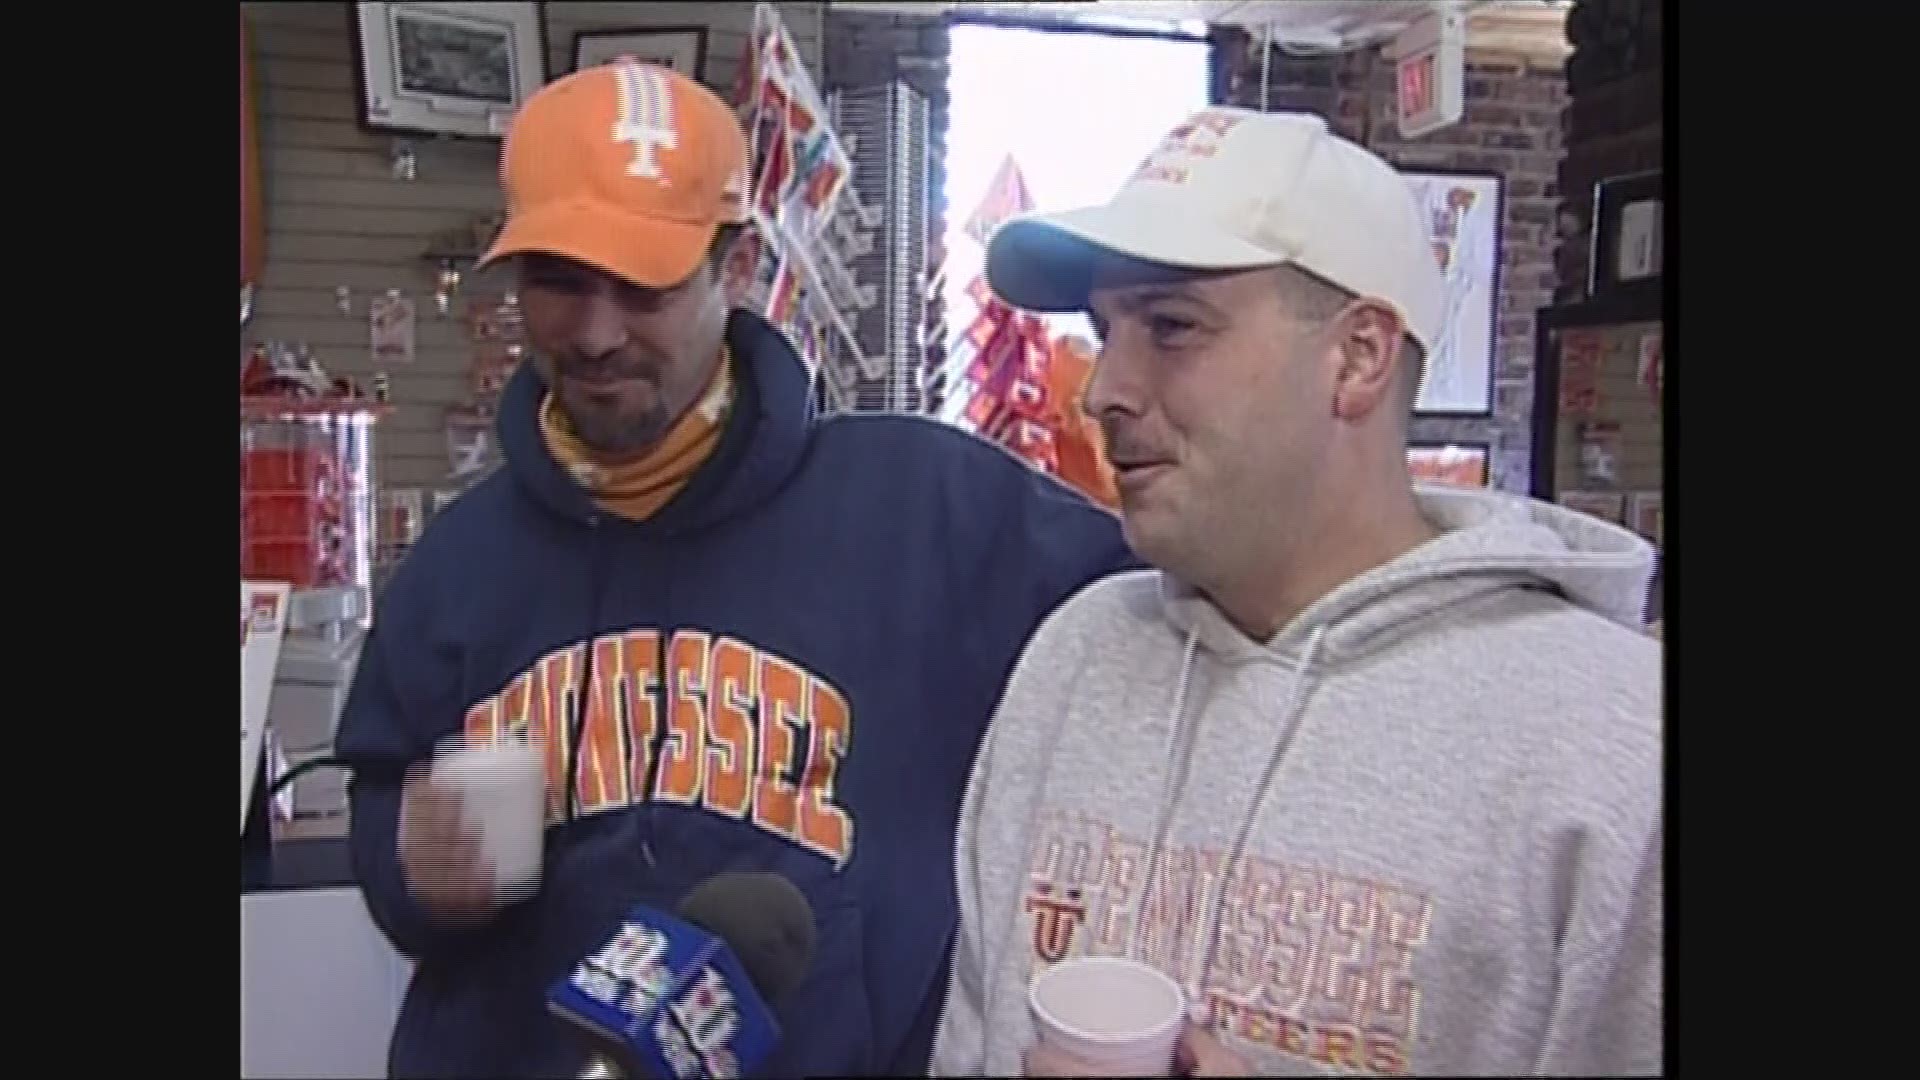 Tennessee fans are a superstitious lot. And in 1998, everyone had some kind of good luck charm to get Tennessee all the way.